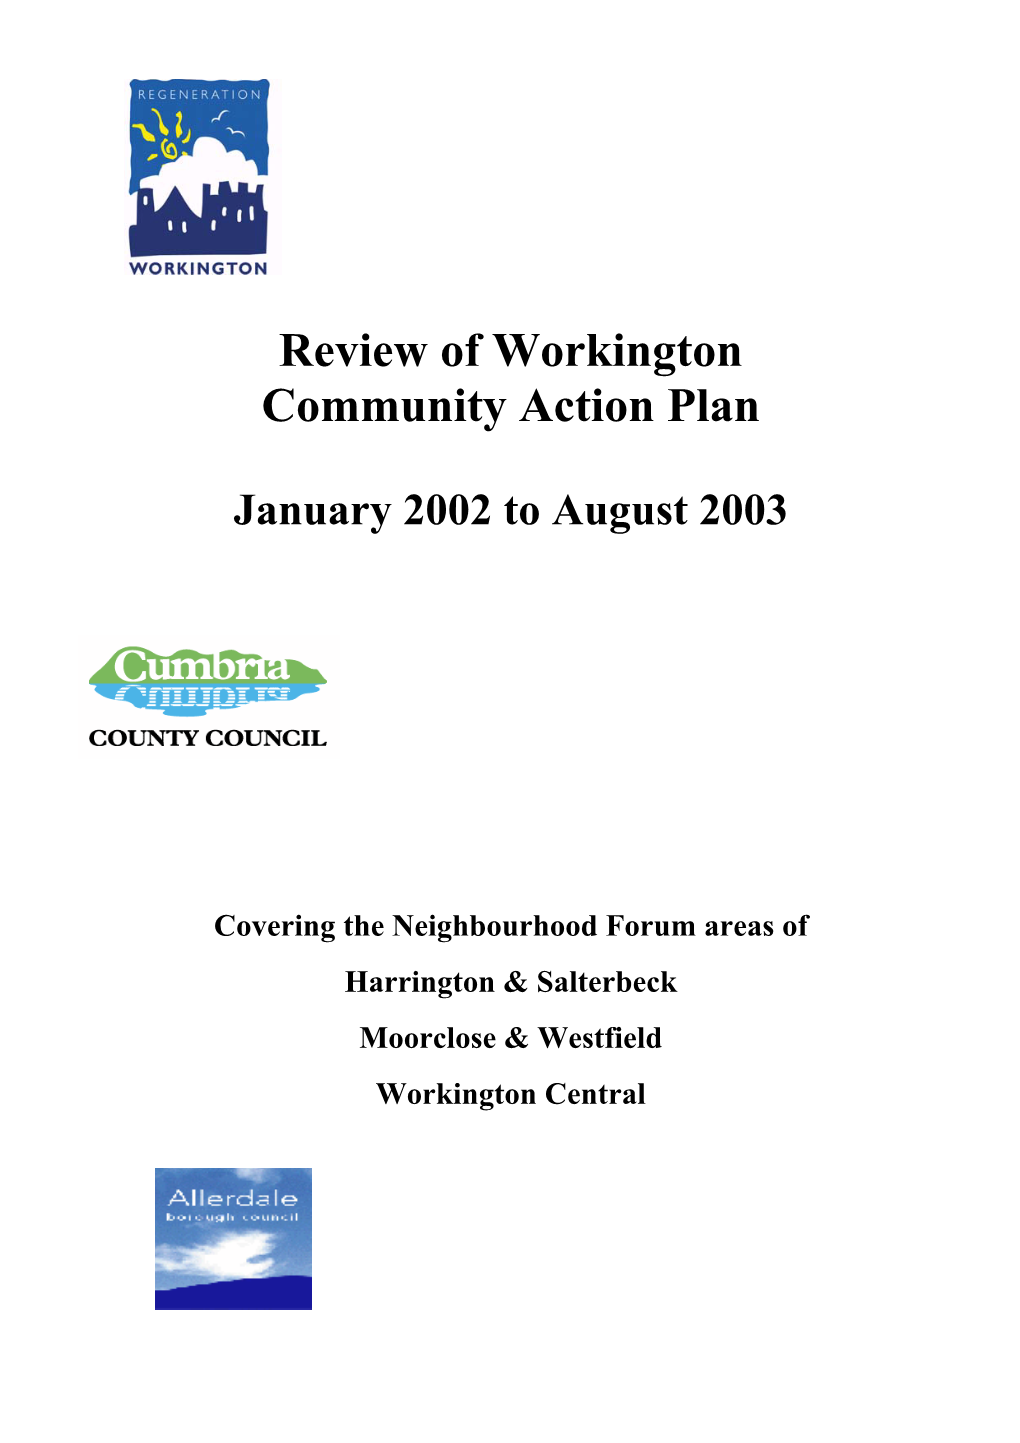 Review of Workington Community Action Plan